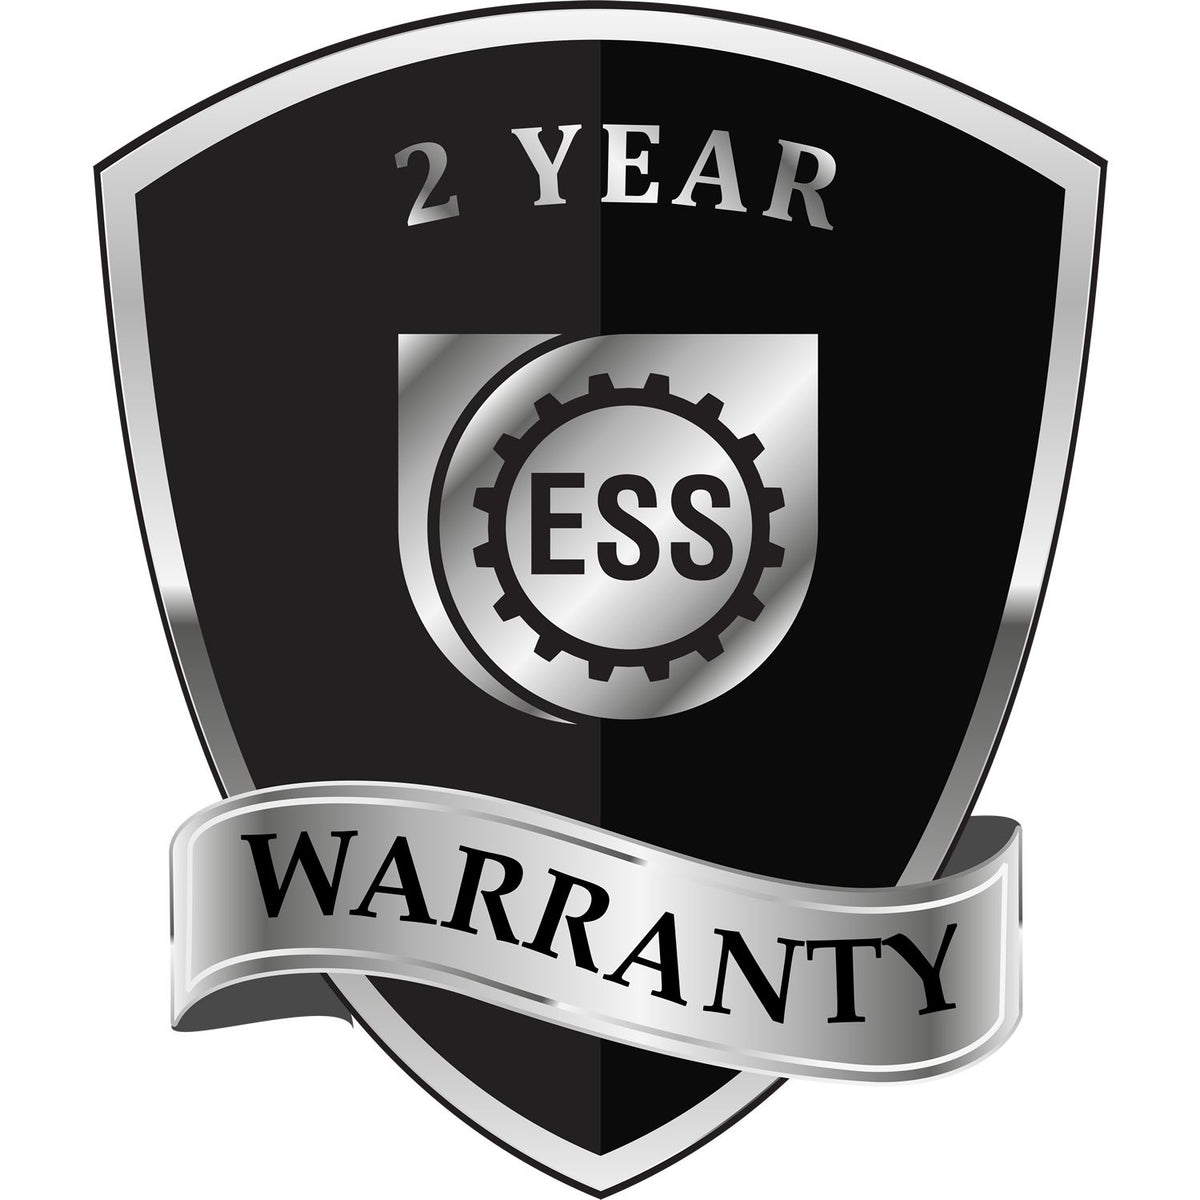 A badge or emblem showing a warranty icon for the Extended Long Reach Texas Architect Seal Embosser